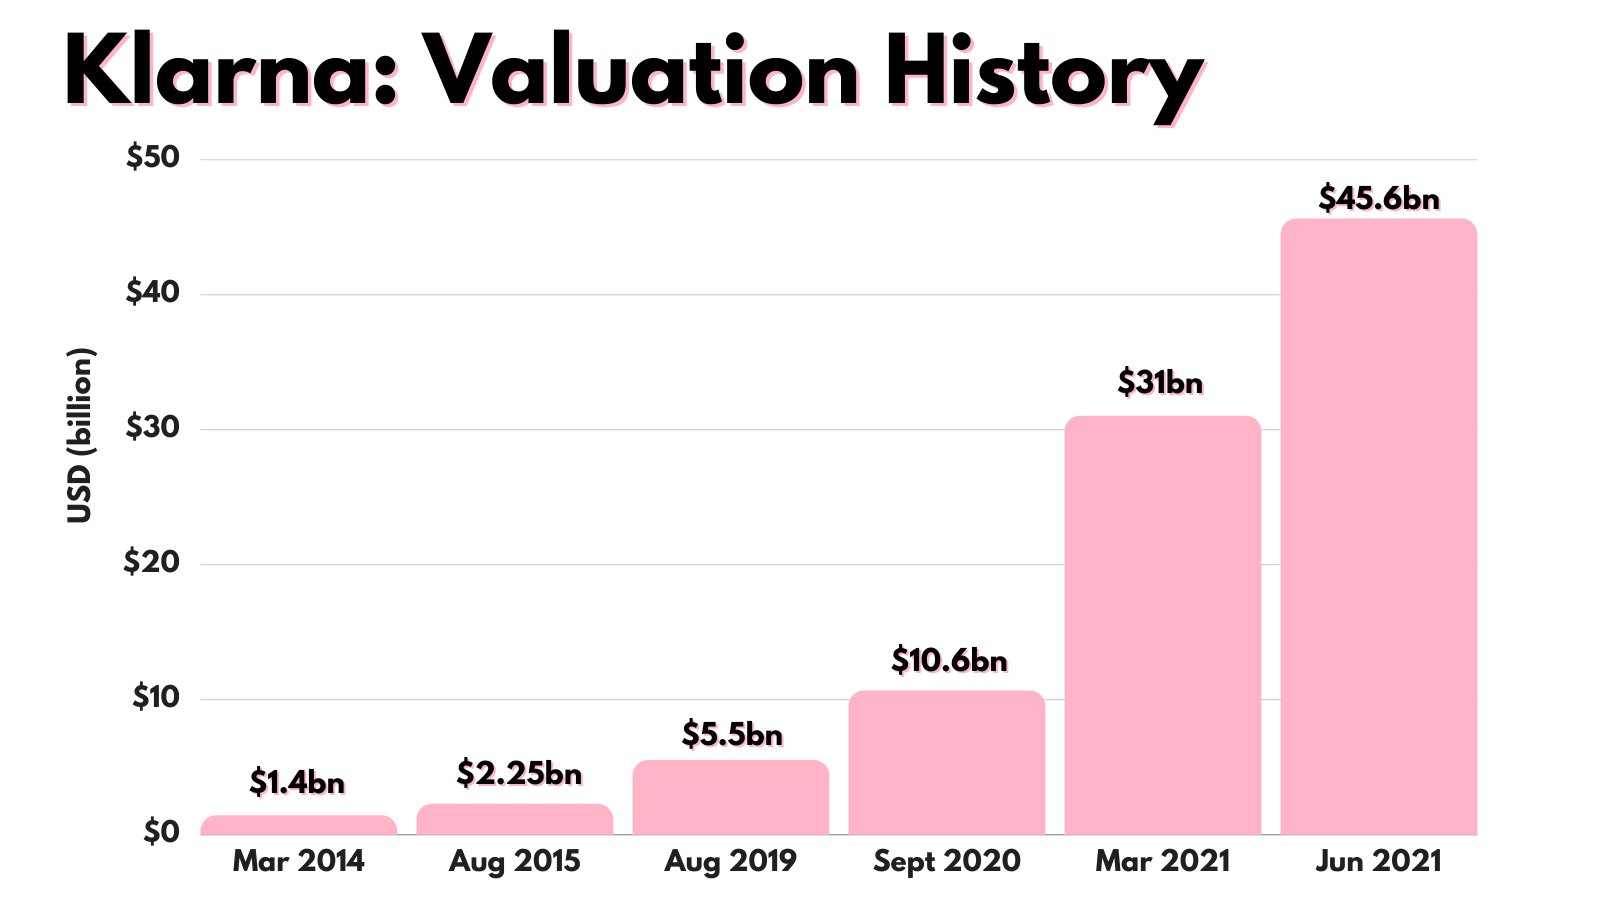 Robert Collings Twitter પર: "Klarna has raised again, this time at a  $45.6bn valuation and just 3 months after the last raise. That's roughly a  32x revenue multiple It attaches a value